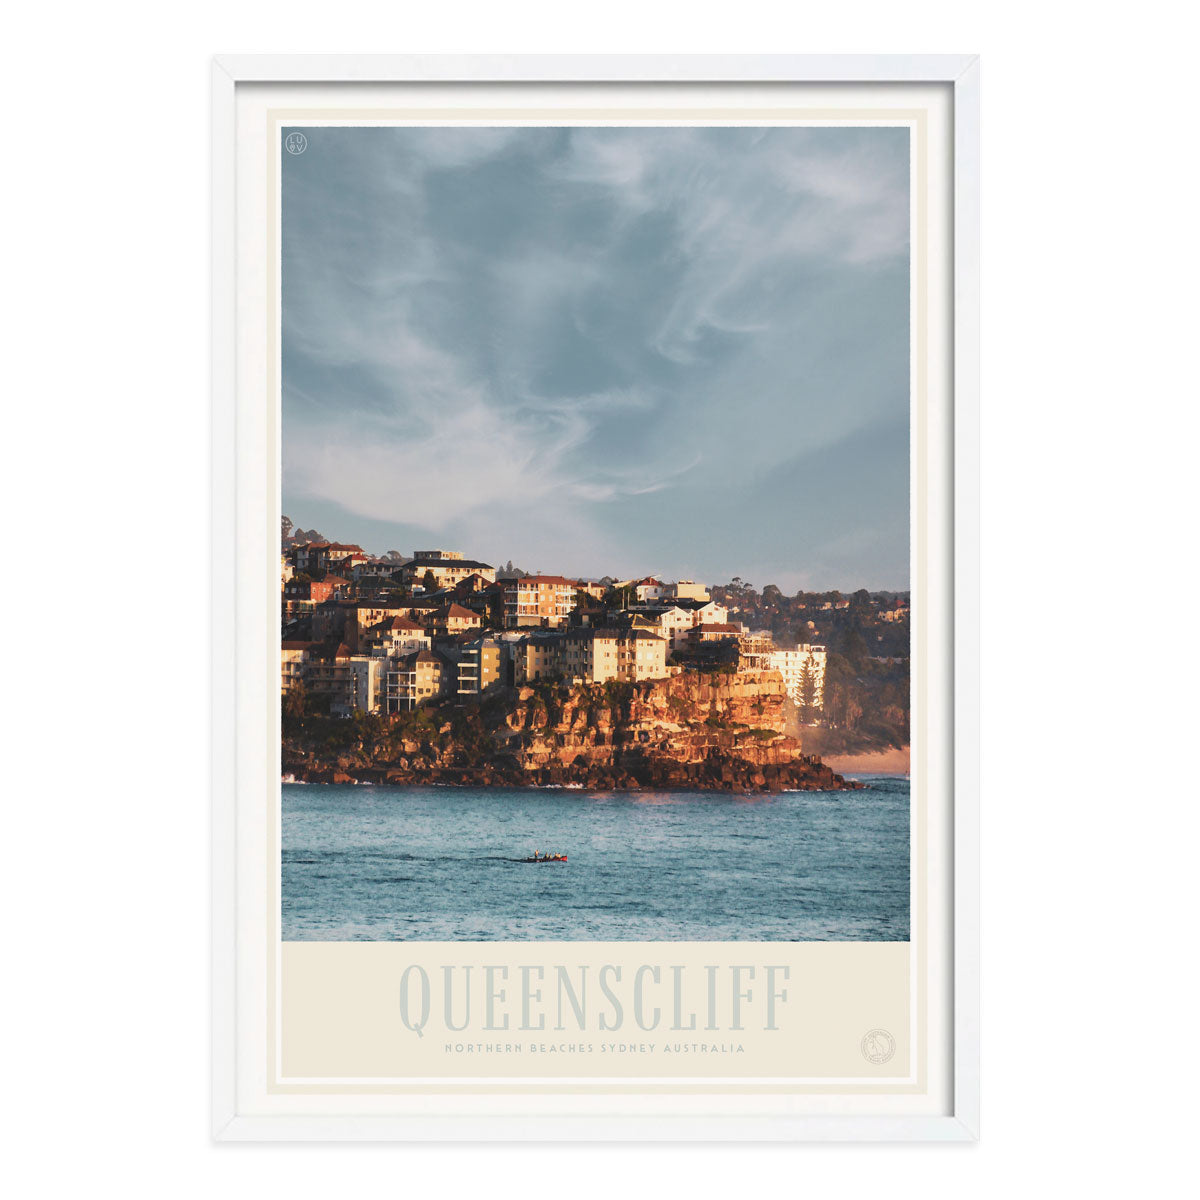 Queenslcliff Manly vintage retro poster print in white frame from Places We Luv